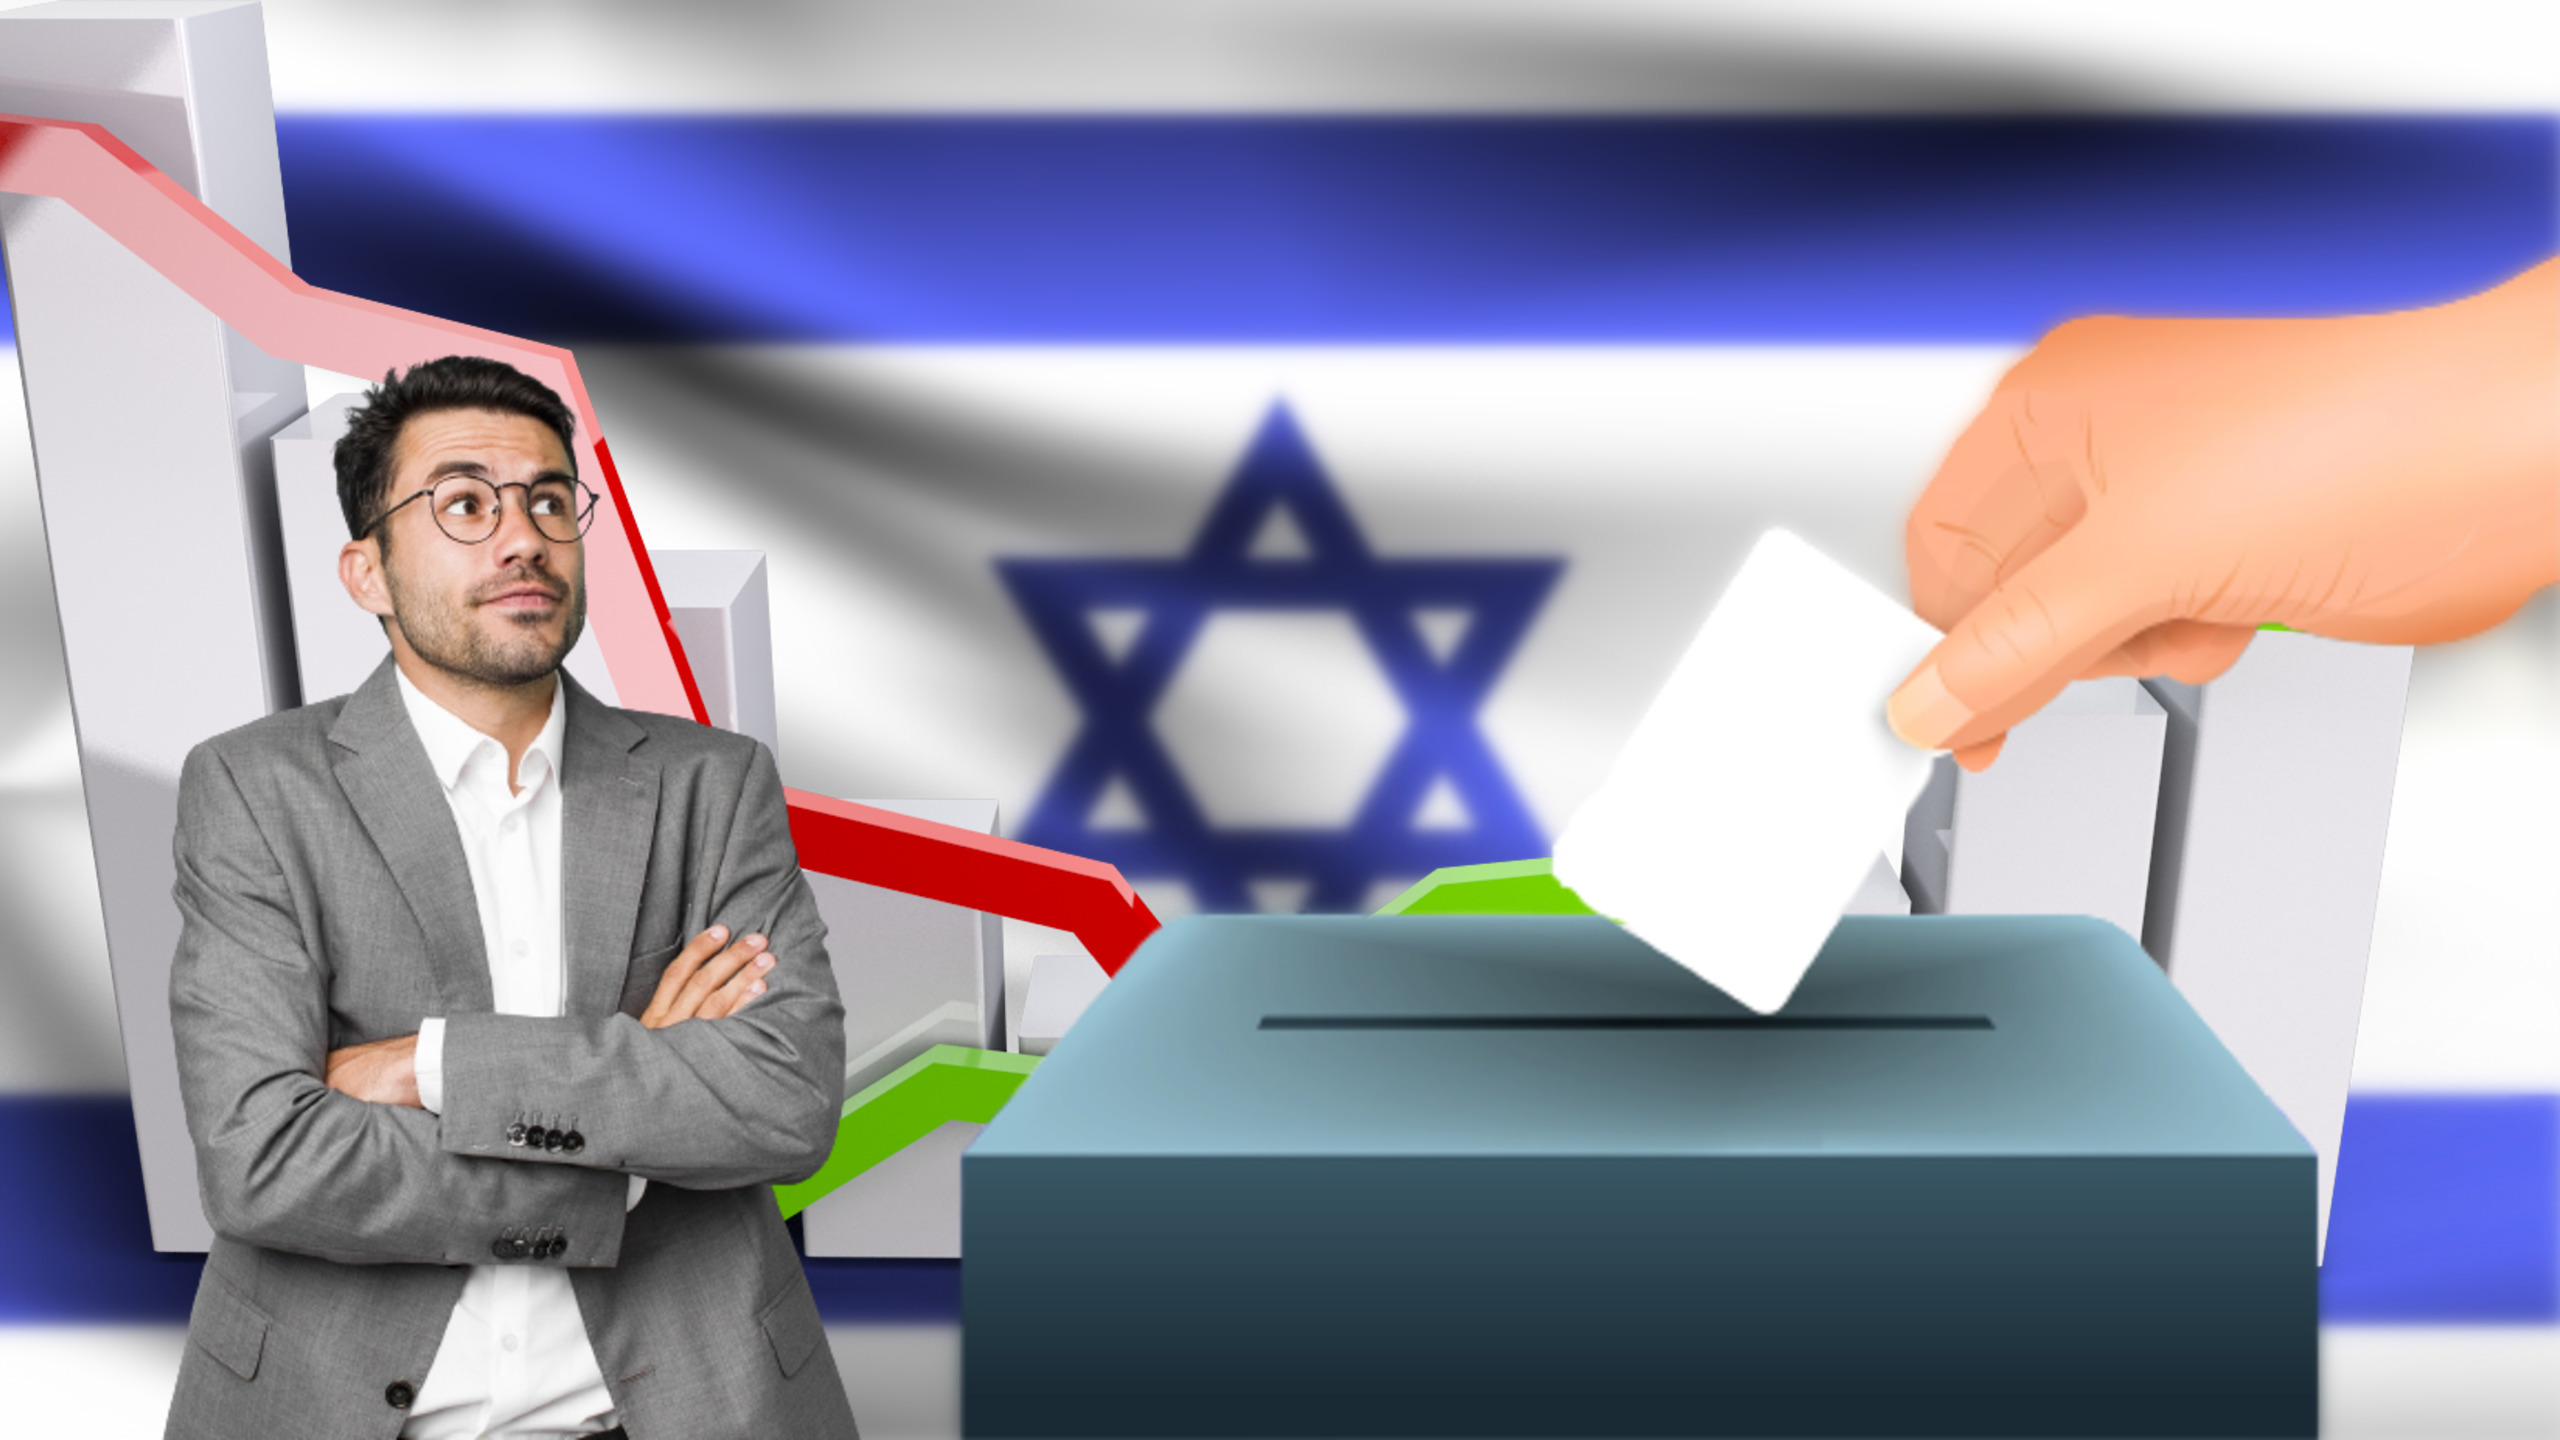 Elections Are Bad for Business, Israeli Economic Leaders Say